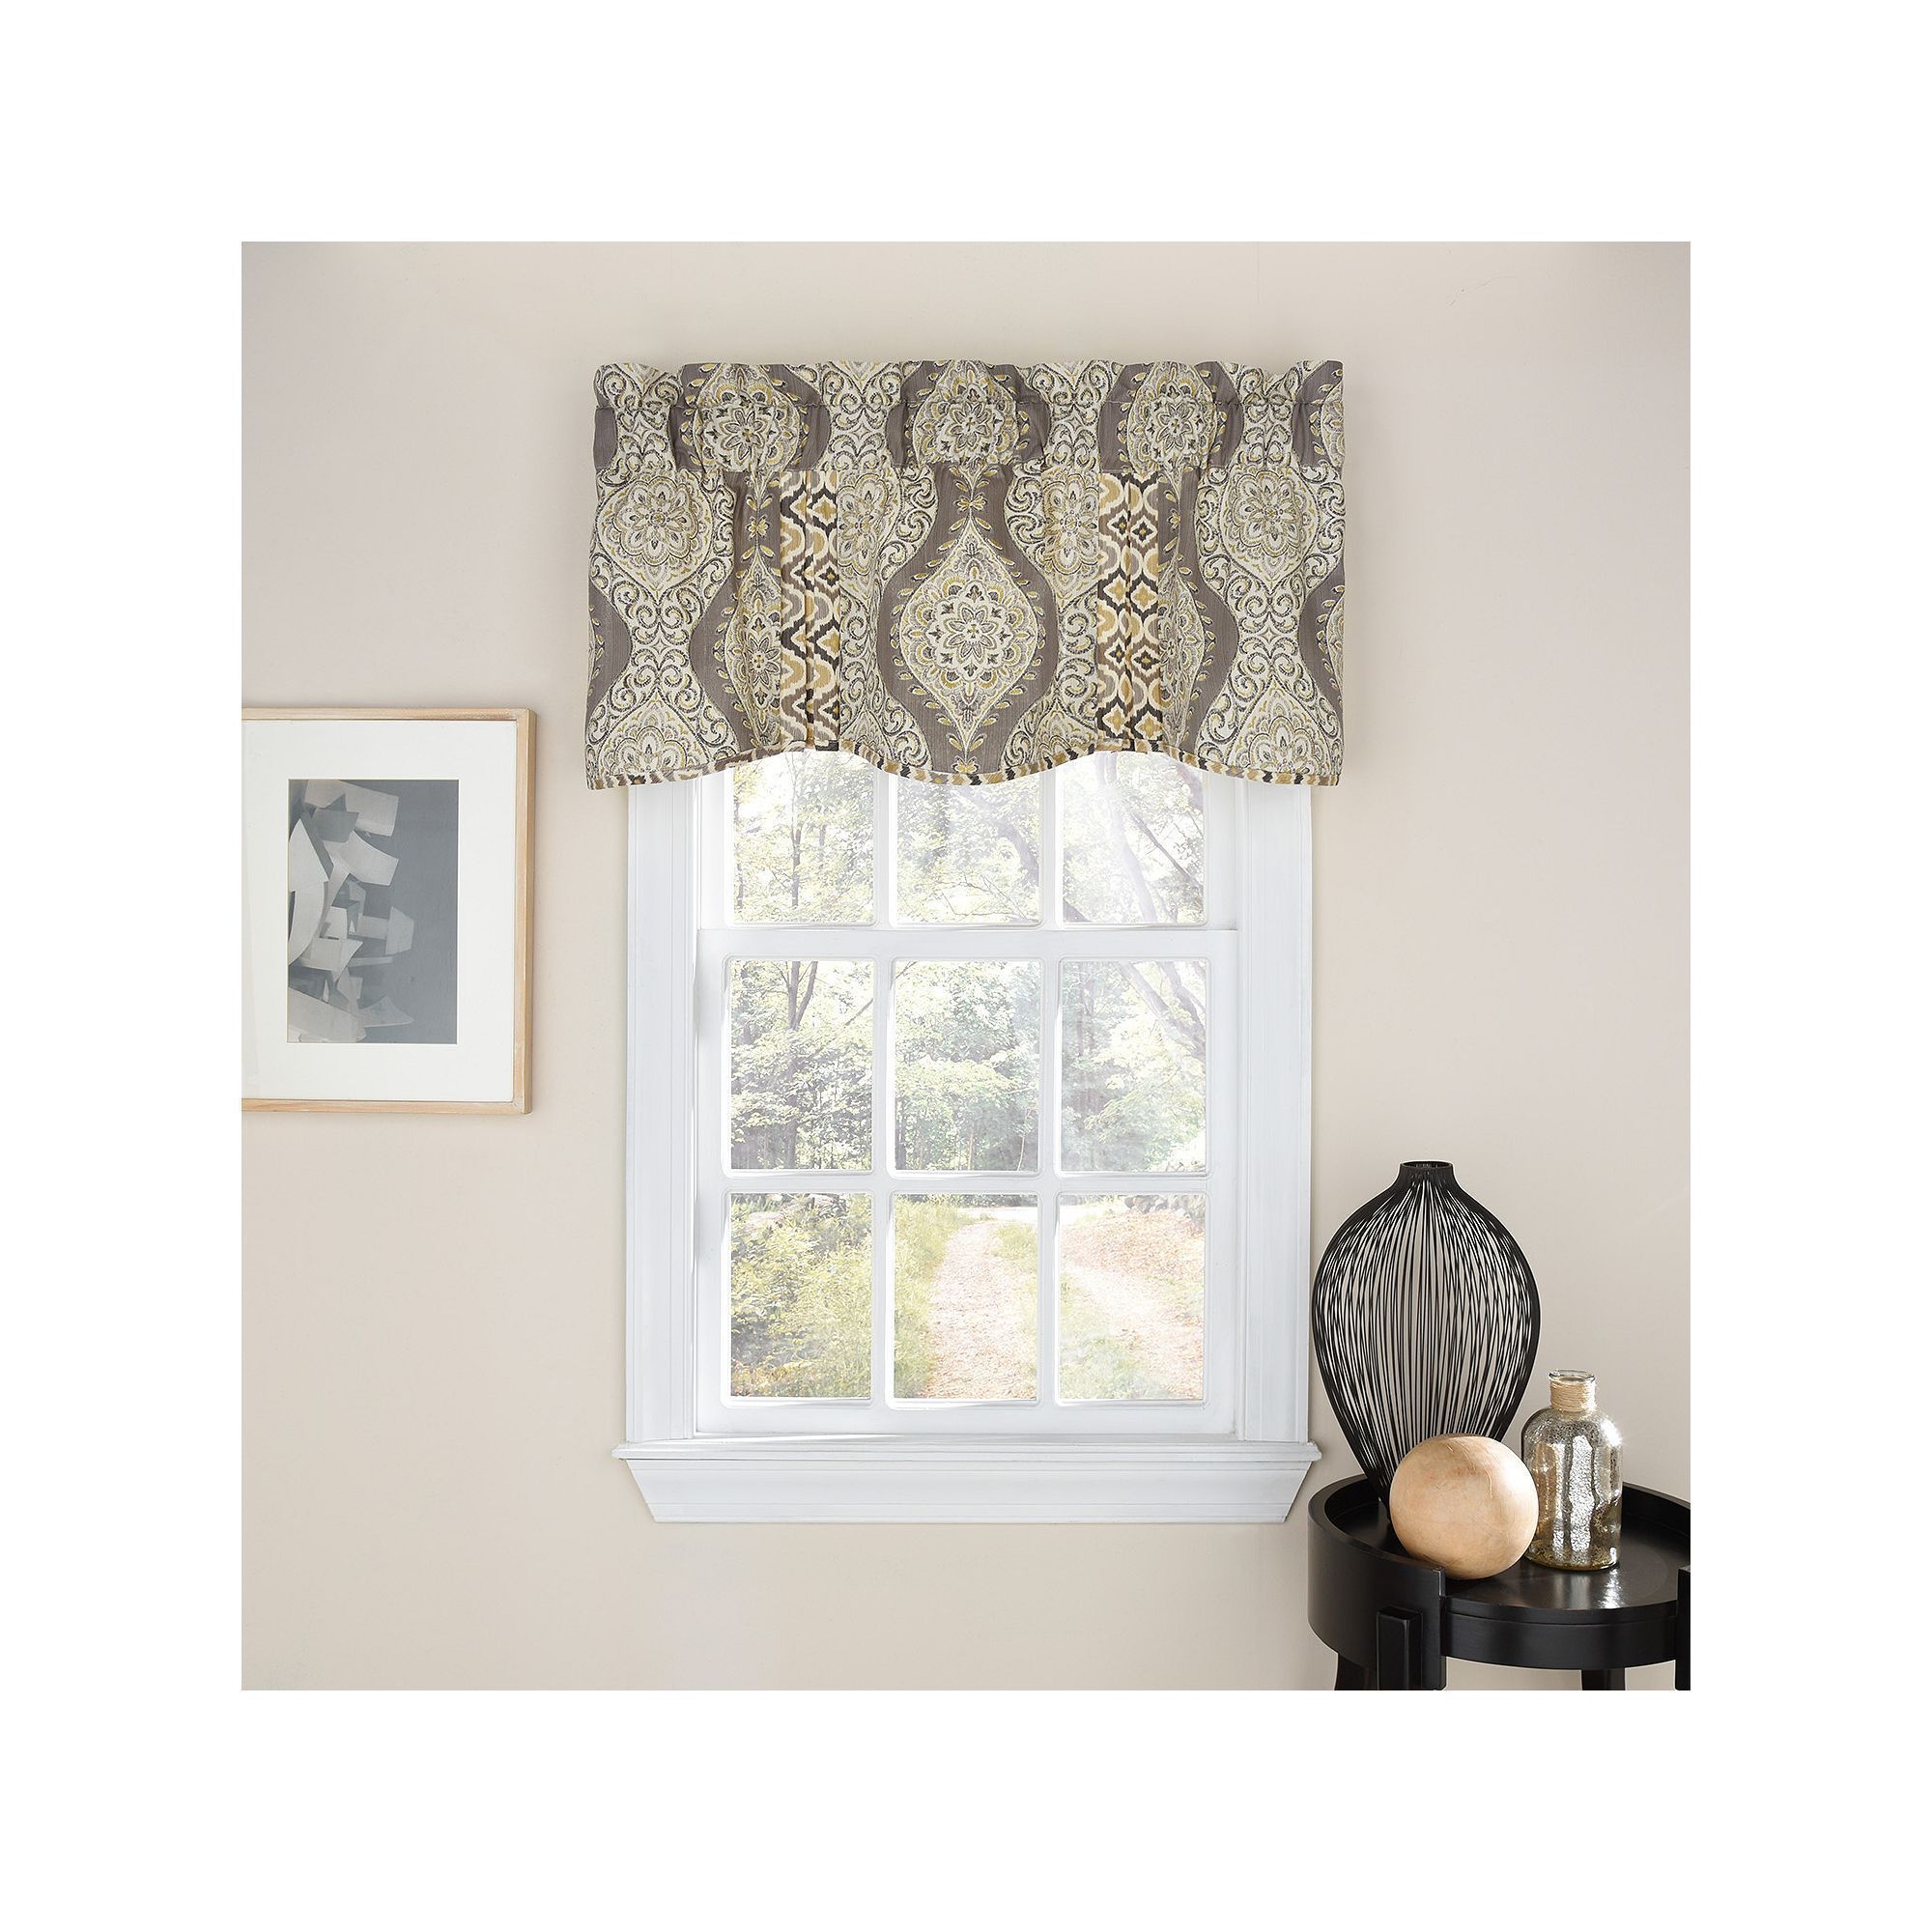 Waverly Moonlight Medallion Window Valance | Products With Regard To Medallion Window Curtain Valances (View 13 of 20)